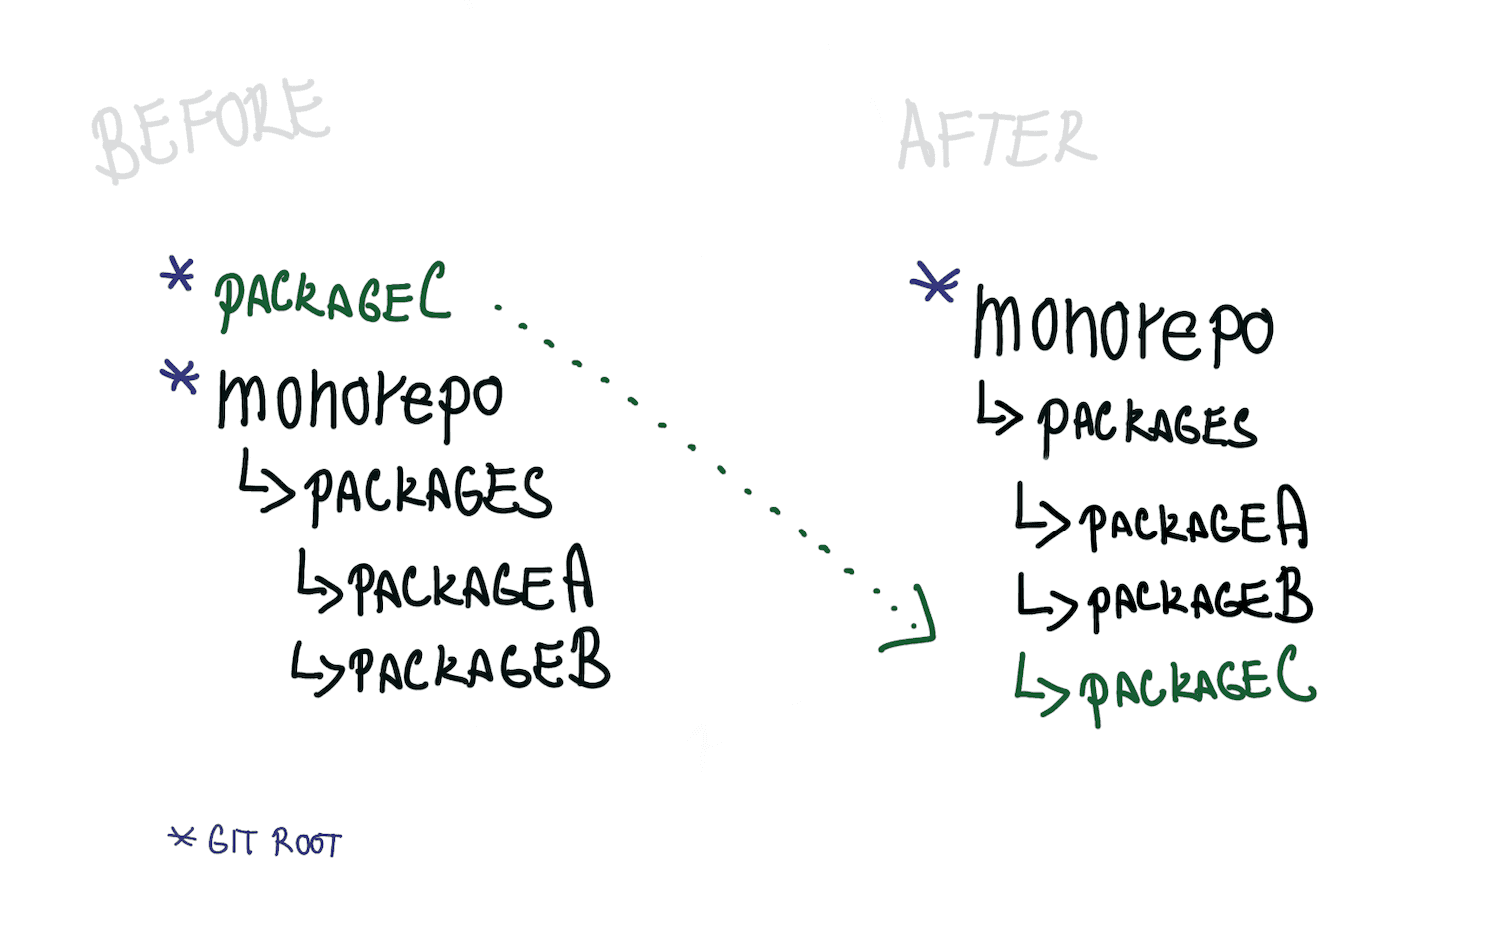 Folder structure before and after merge